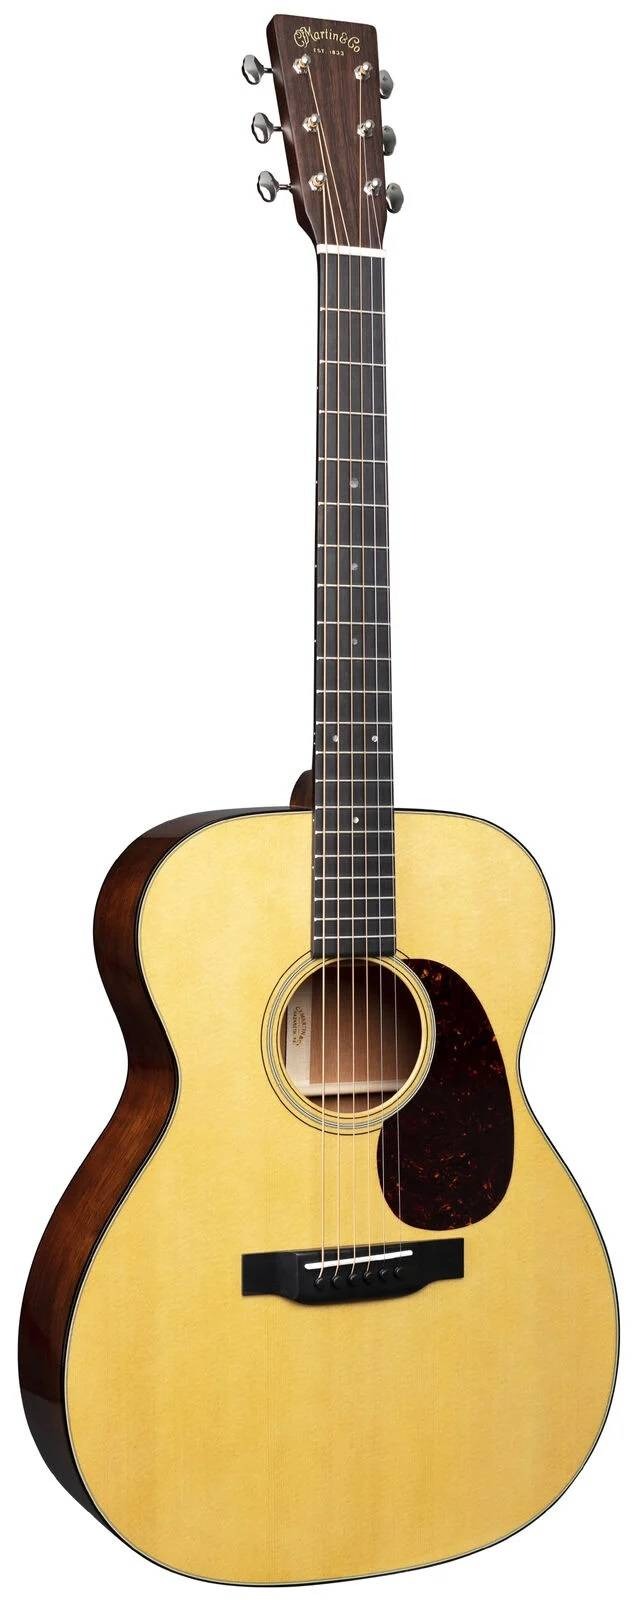 Martin 000-18 Standard Series 000 Acoustic Guitar Full Solid Spruce Top, Mahogany Back & Sides w/Hardcase